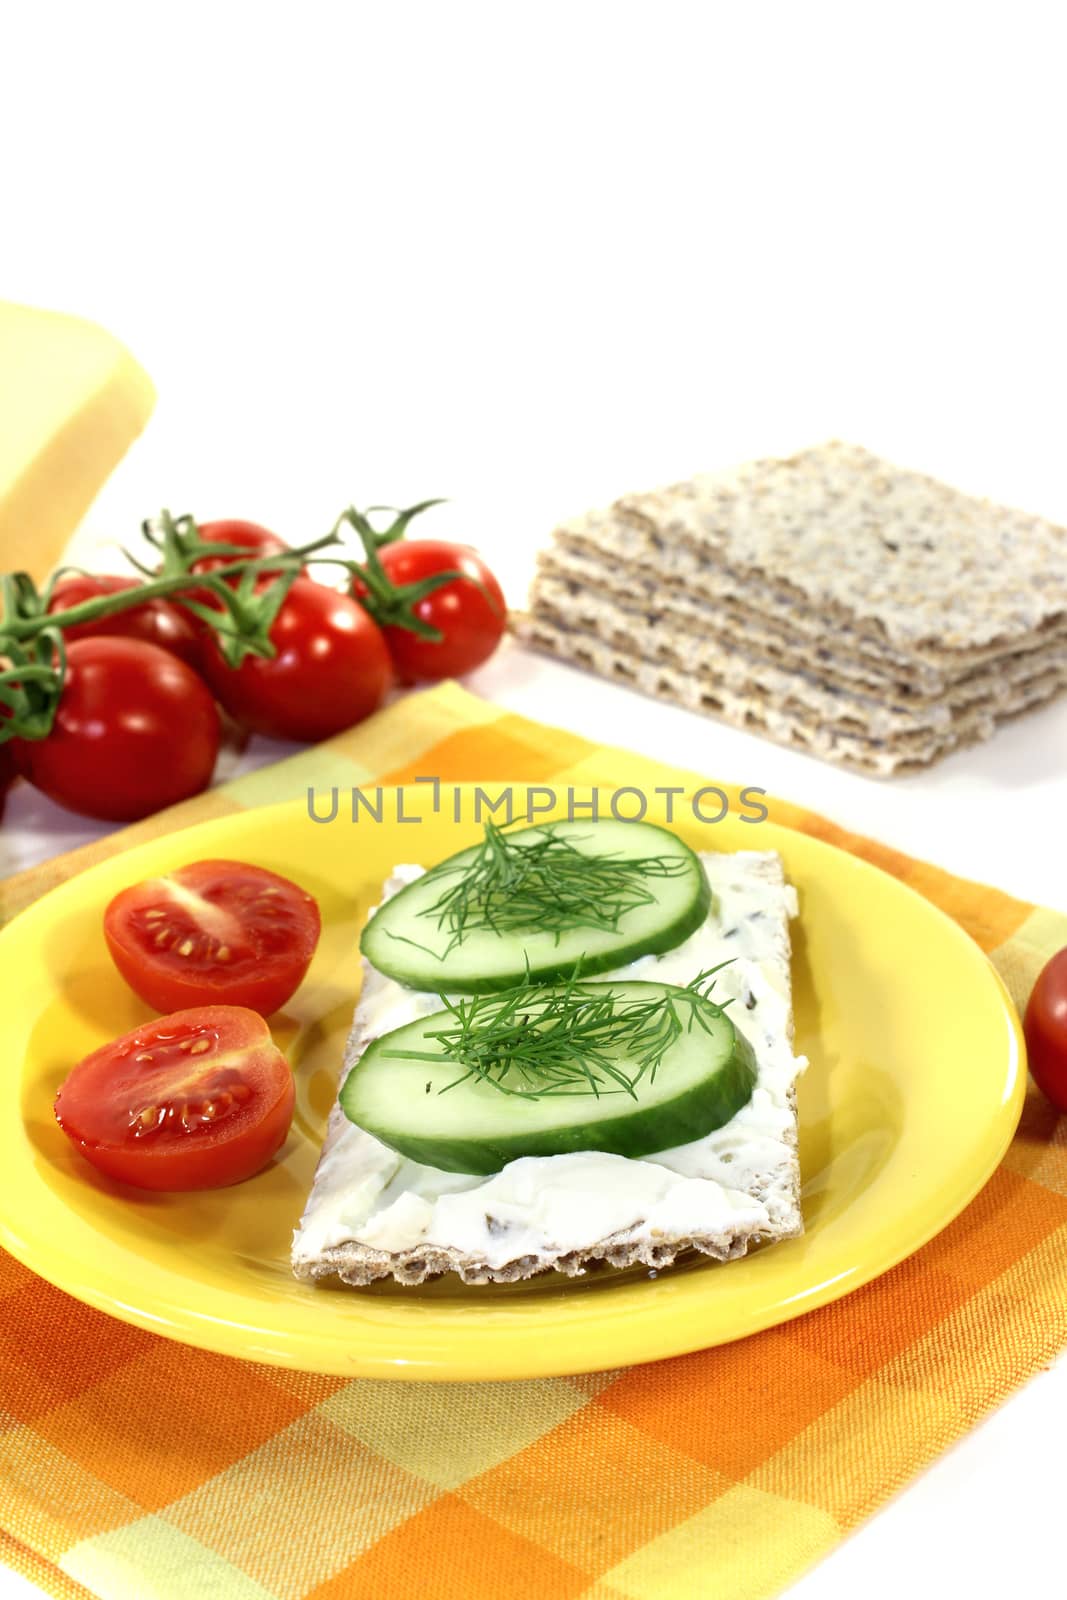 Crispbread with cream cheese and tomatoes on a bright background